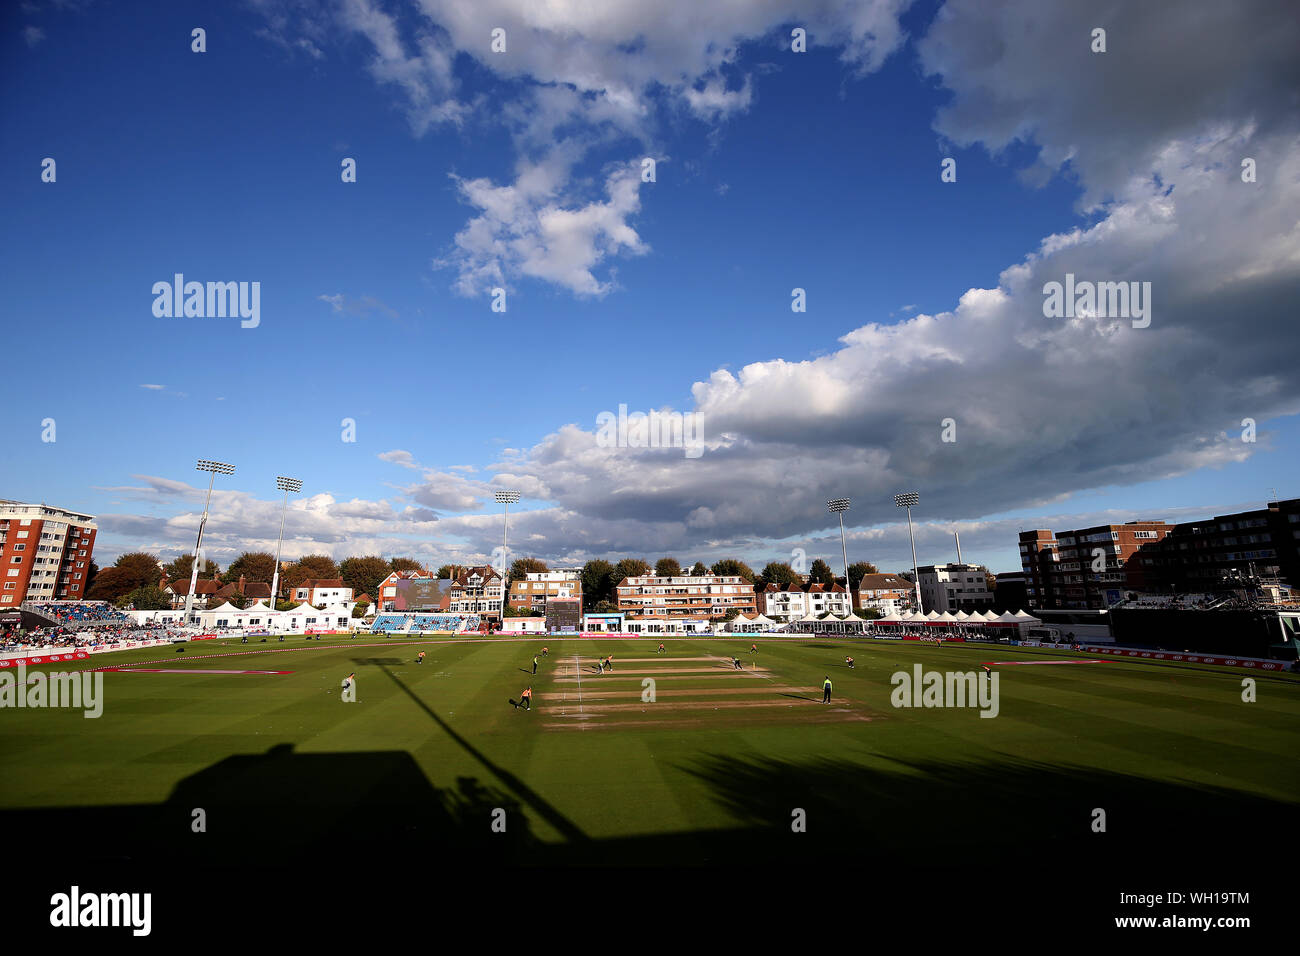 General view during Kia Super League final at the 1st Central County Ground, Hove. Stock Photo